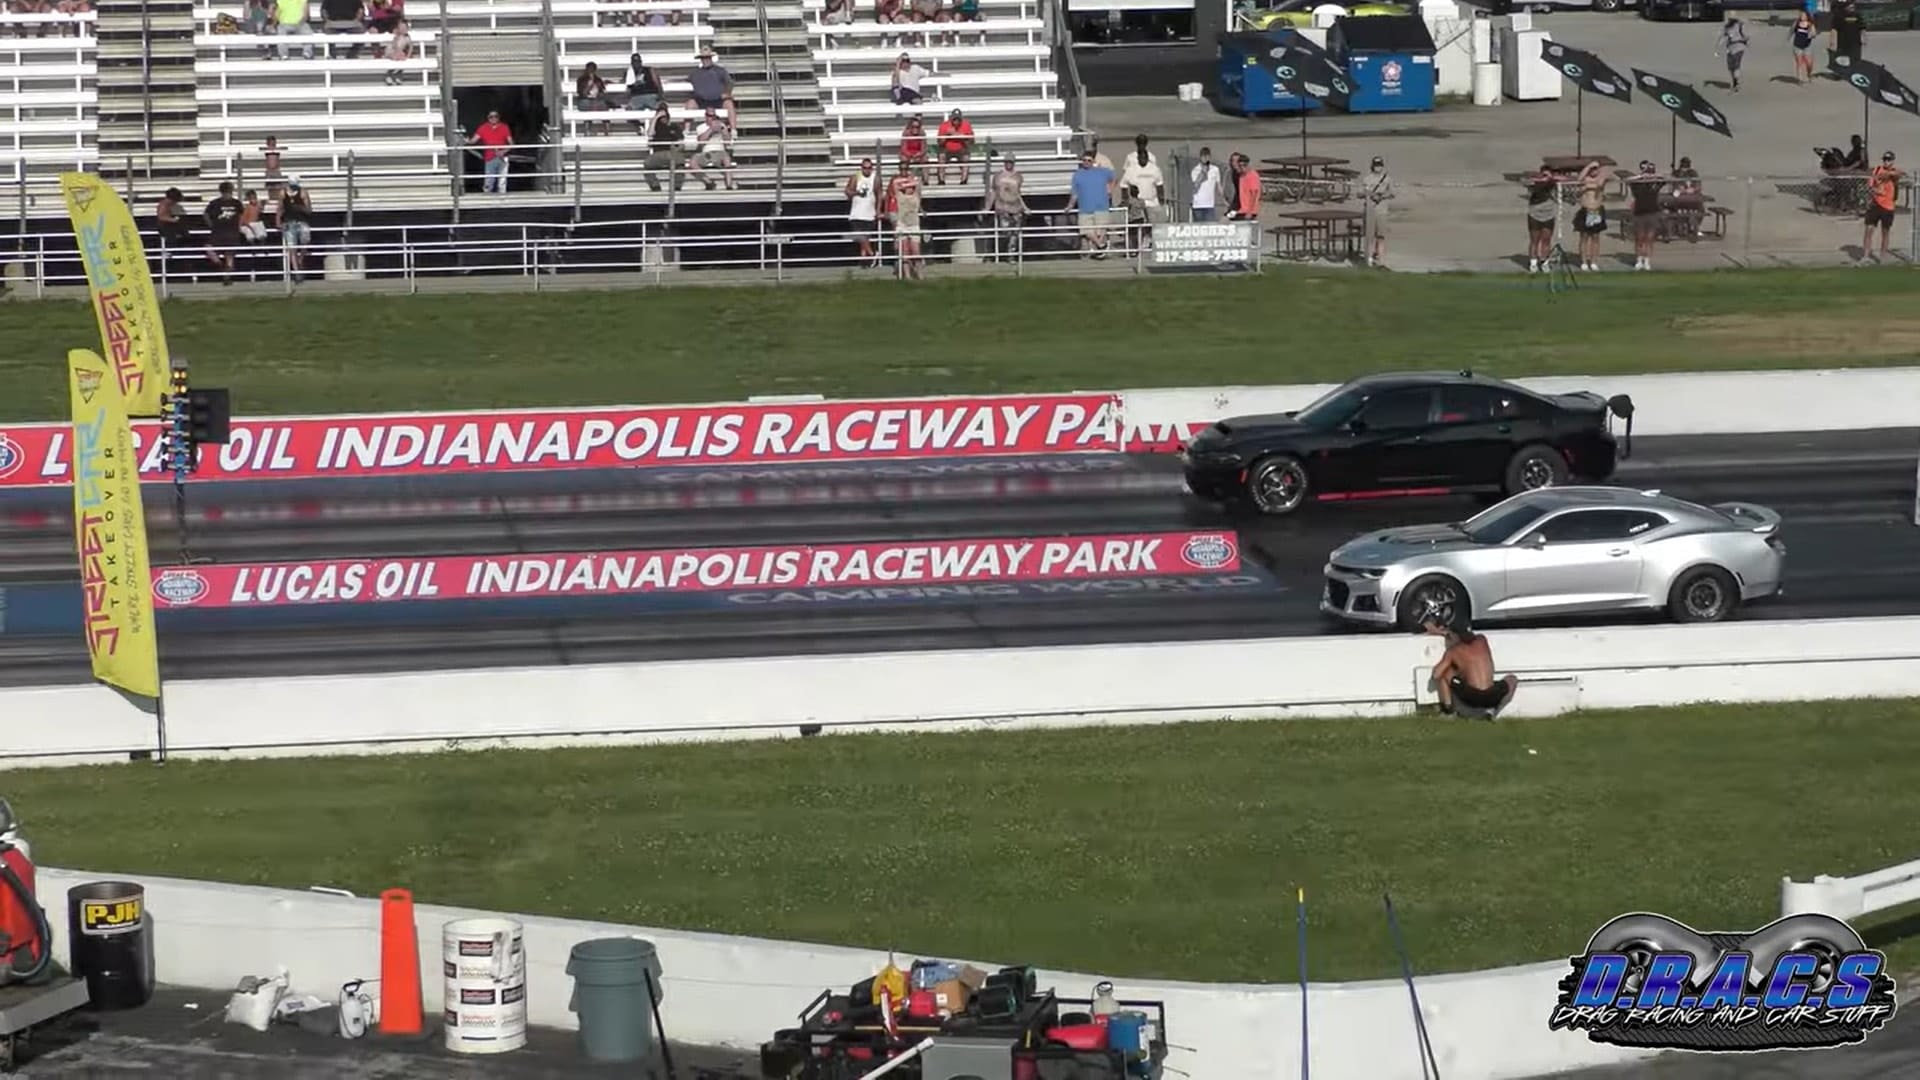 Charger Hellcat Dominates Dragstrip in Thrilling Races Against American Muscle